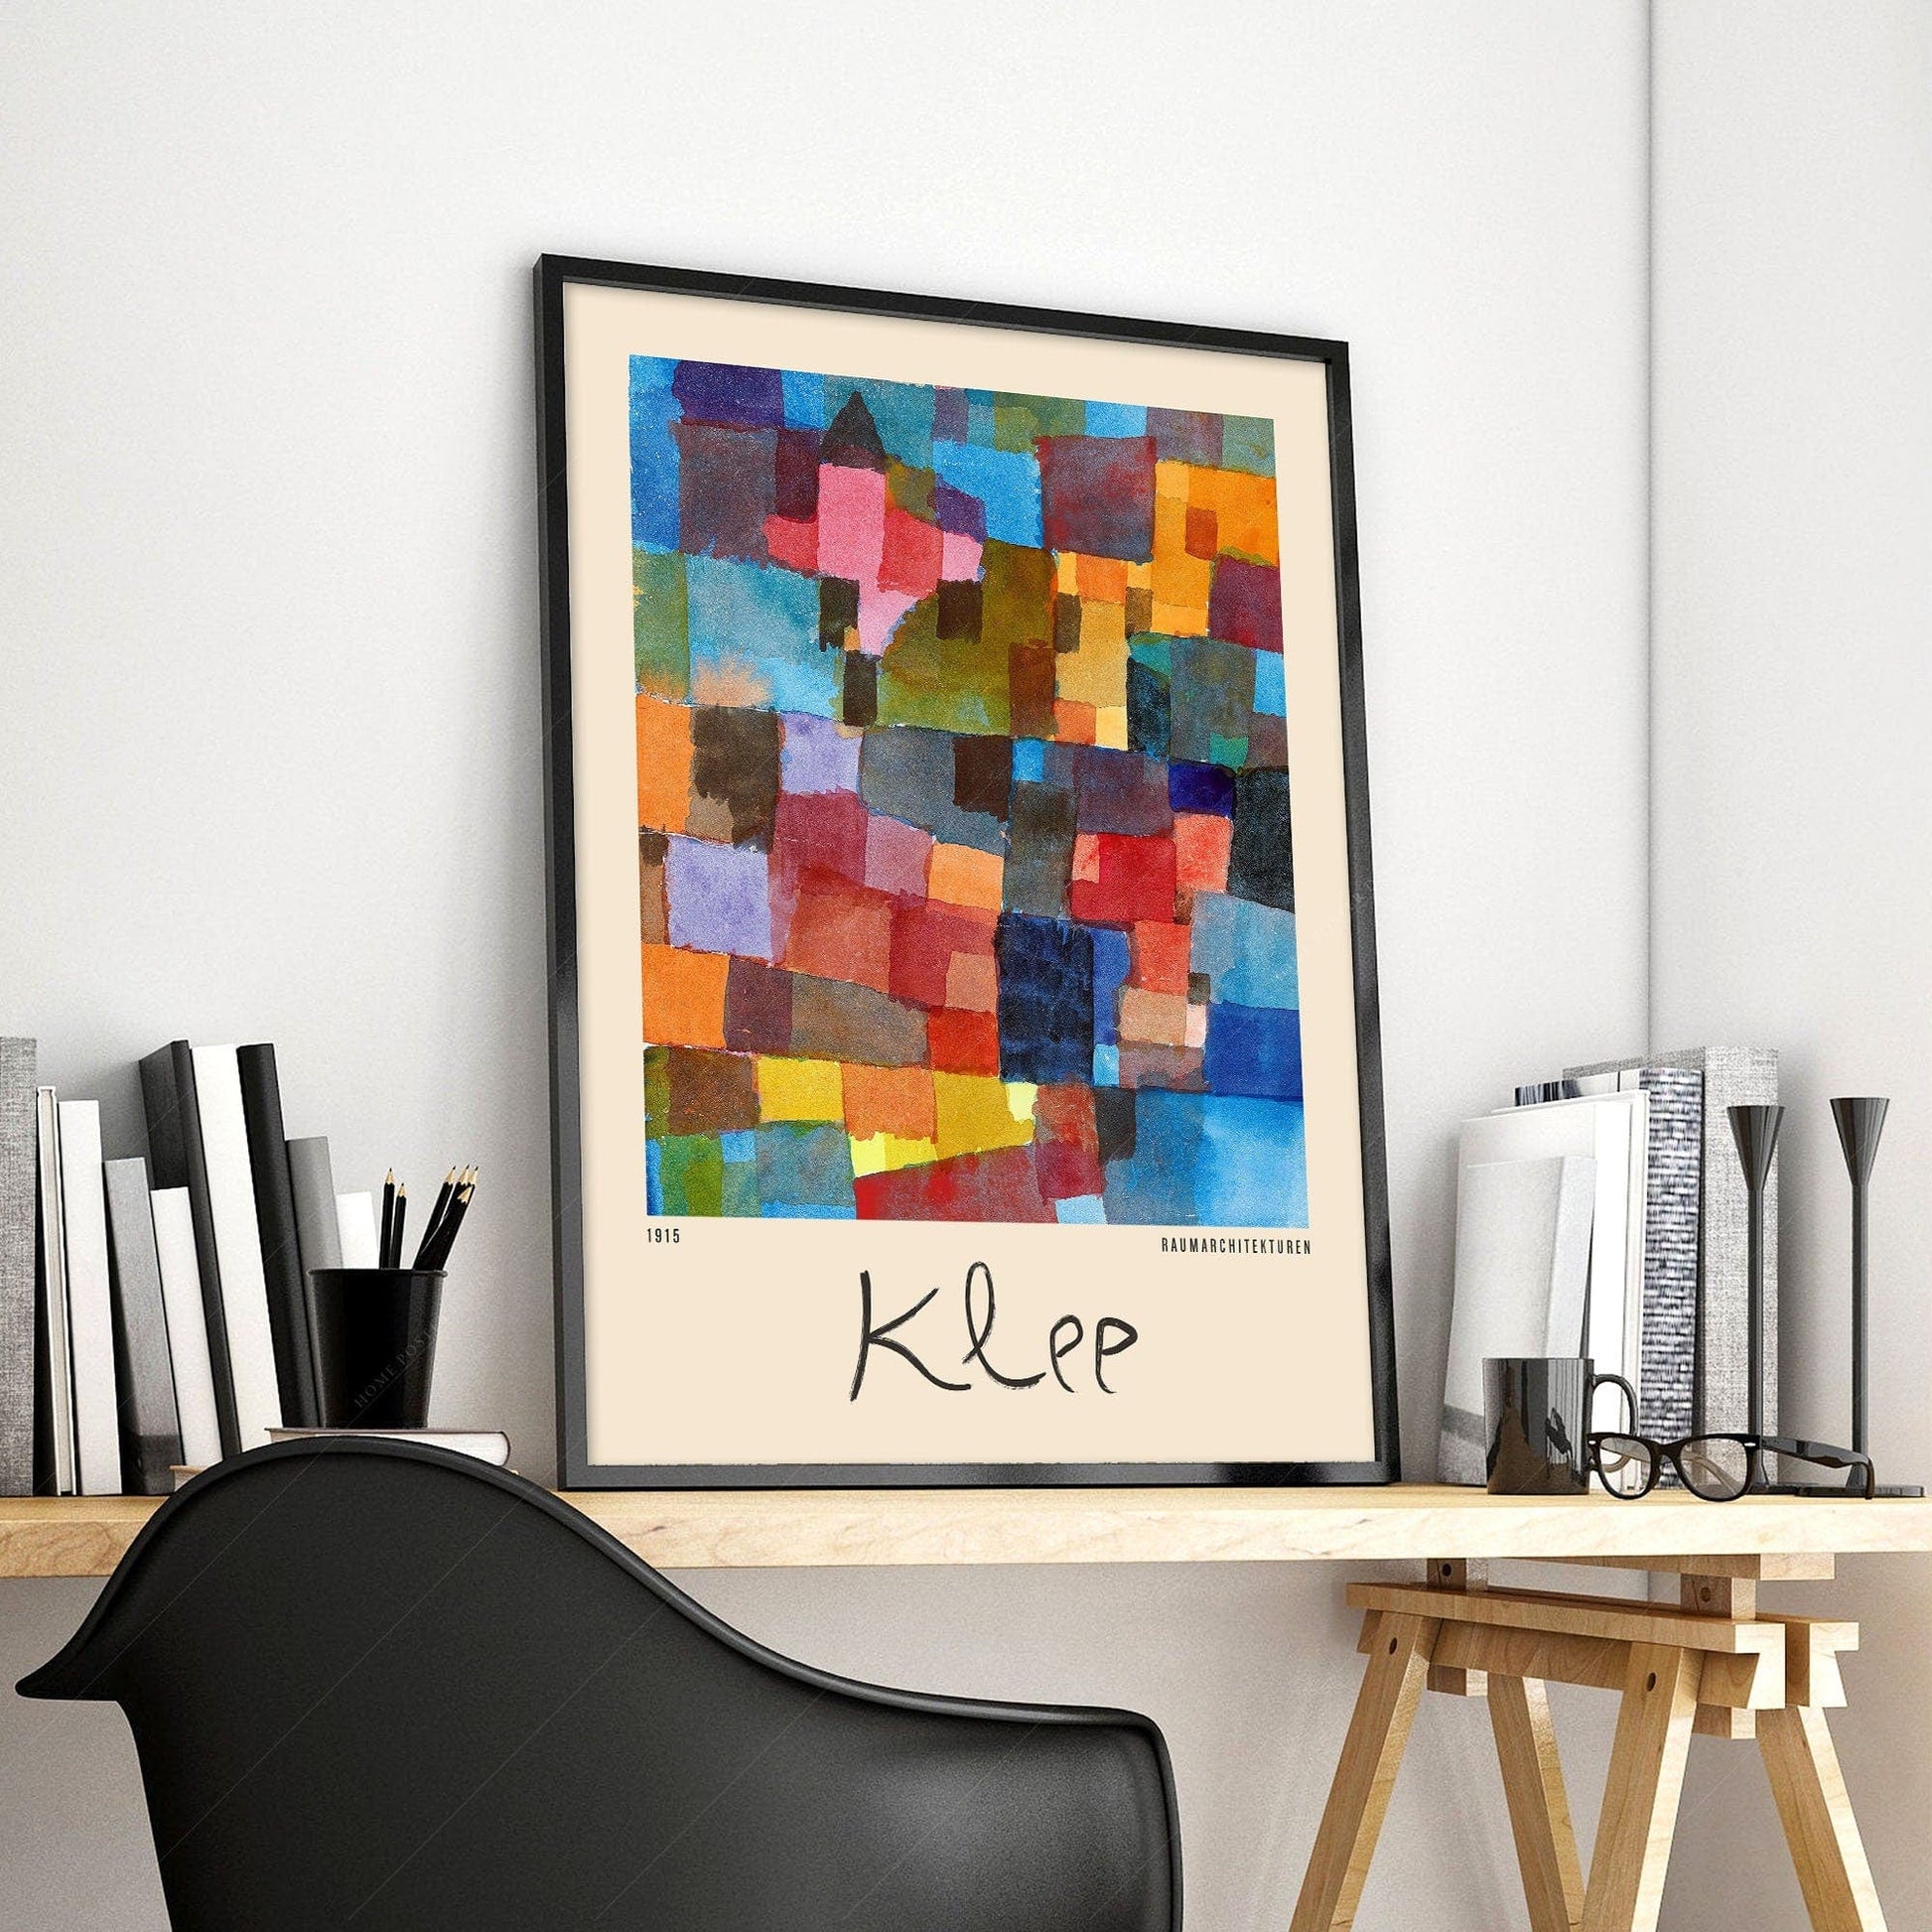 Home Poster Decor Paul Klee Bauhaus master Exhibition Poster Abstract Print Gift for him Classic Modern art Watercolor on paper Raumarchitekturen Colorful art